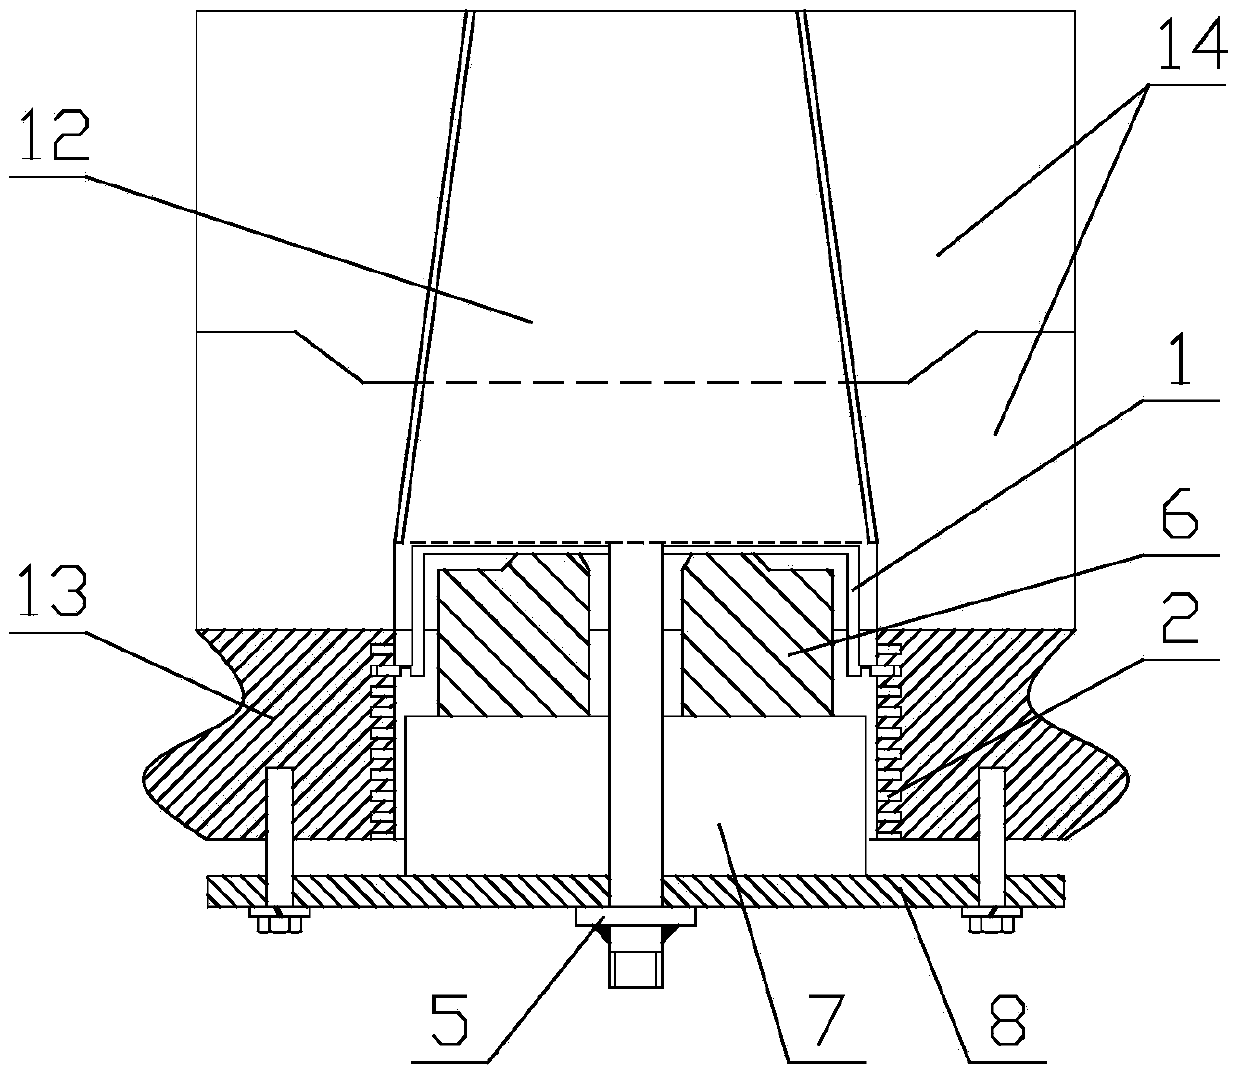 Method of mounting and fixing purging plug brick on outer upper portion of ladle